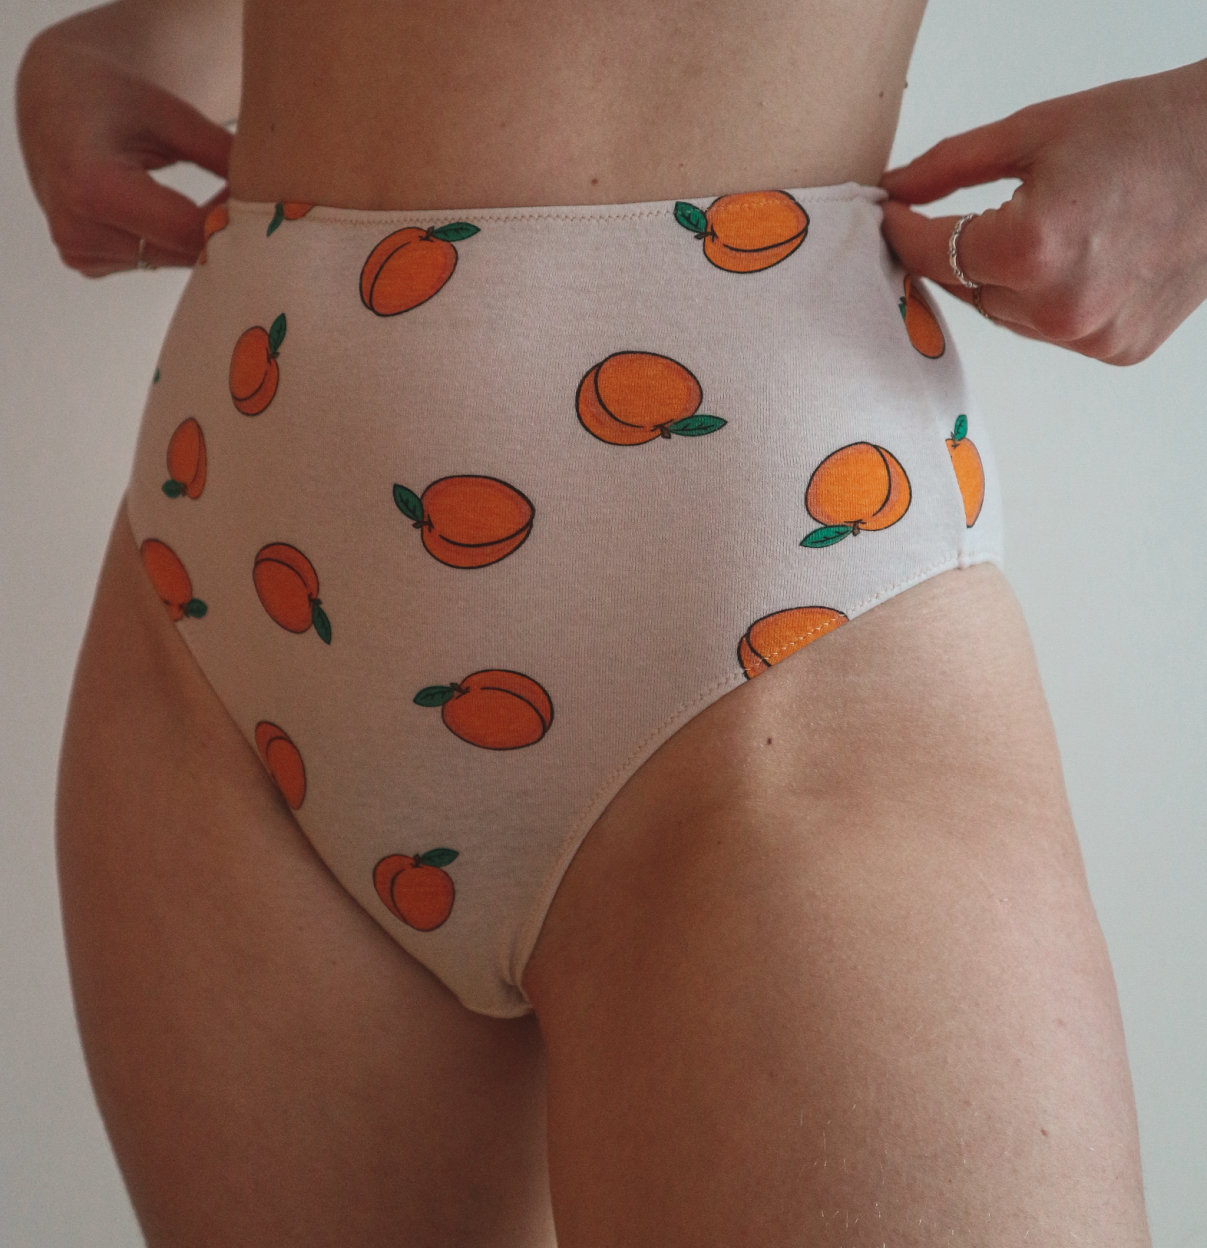 Sewing Your Own Underwear: Is It Worth It?!